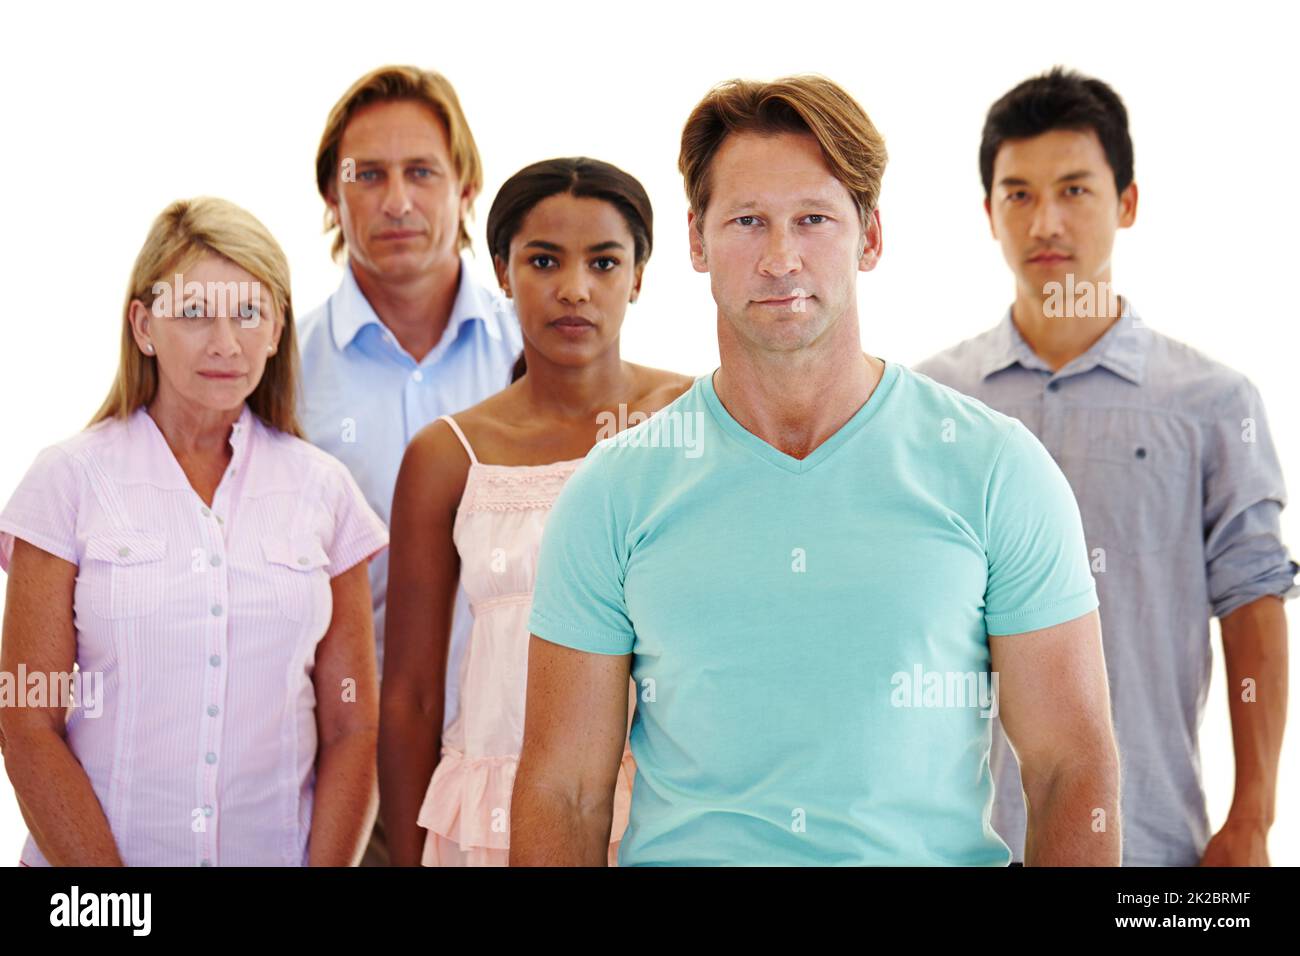 Taking a stand for unity. Five adults of varying ages and ethnicities standing in a group with serious expressions. Stock Photo